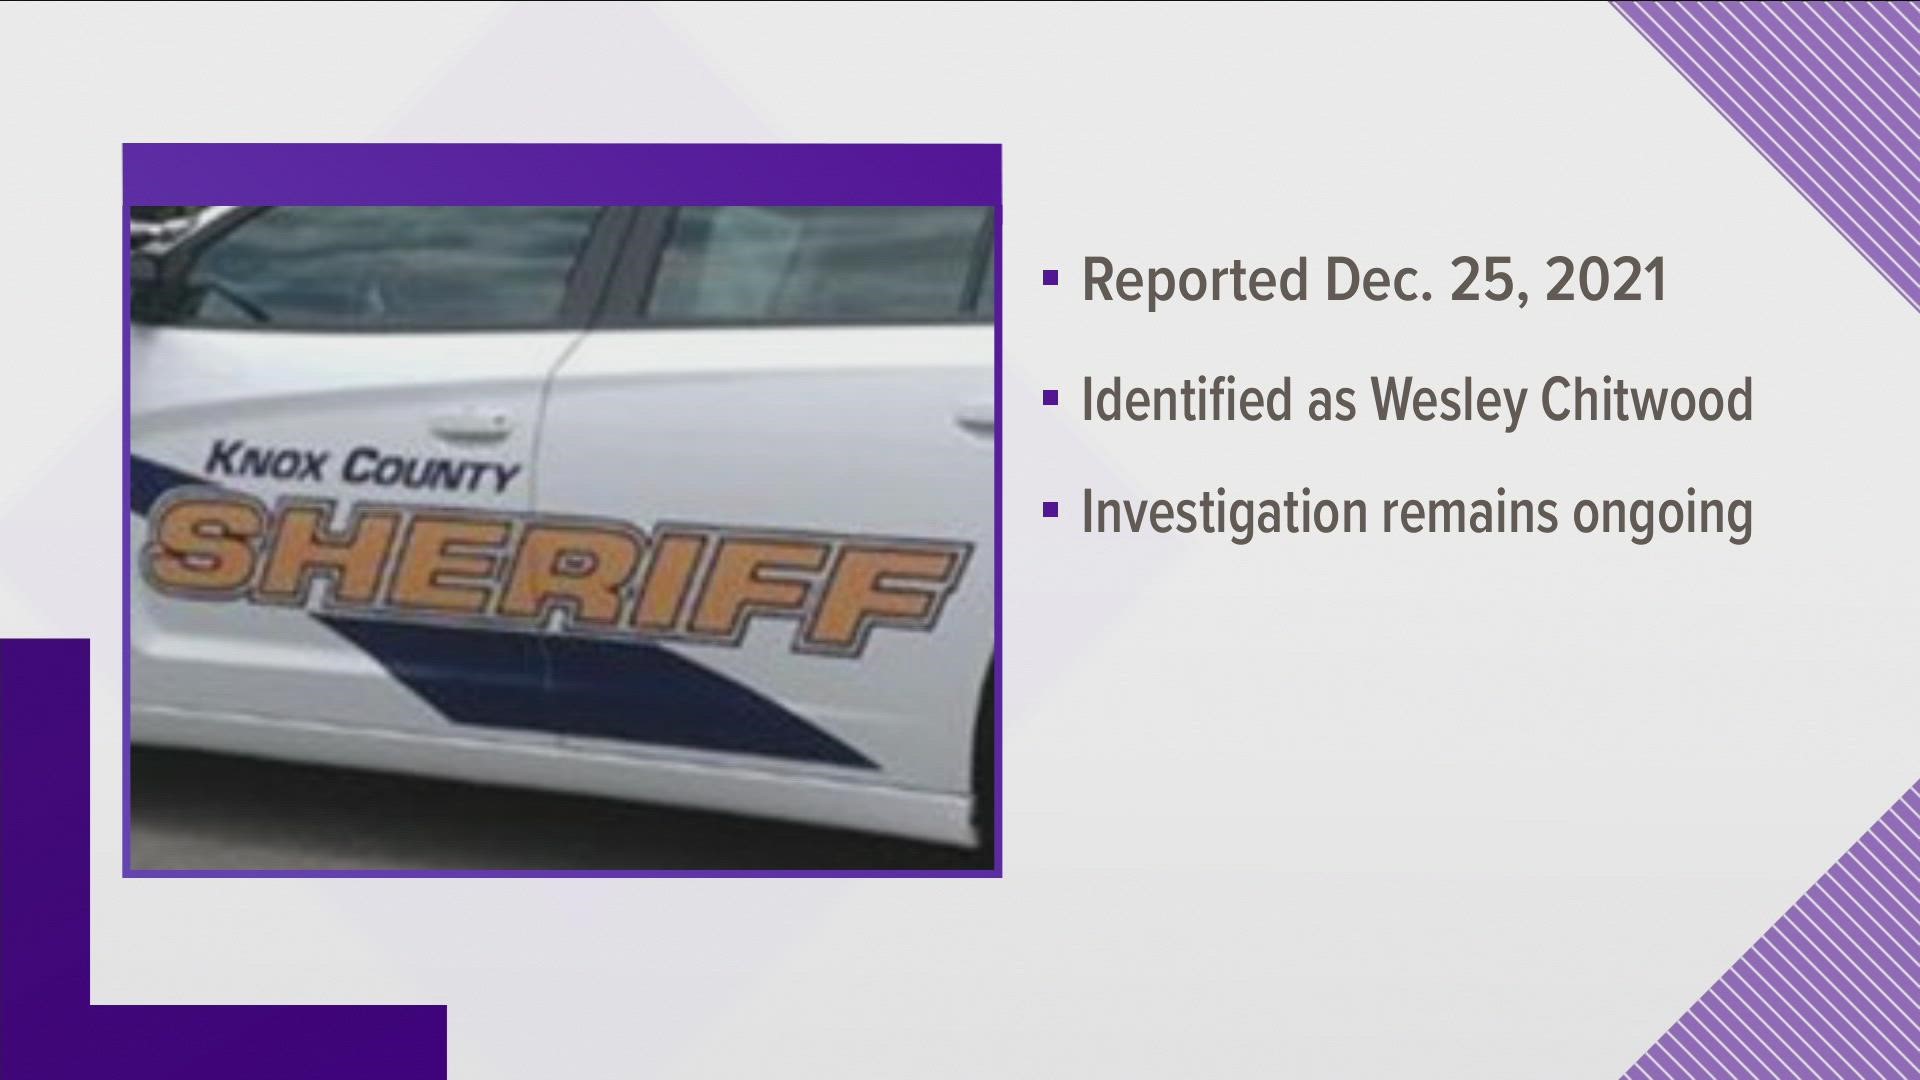 The sheriff's office identified them as Wesley Chitwood, 64, and said the investigation is ongoing.